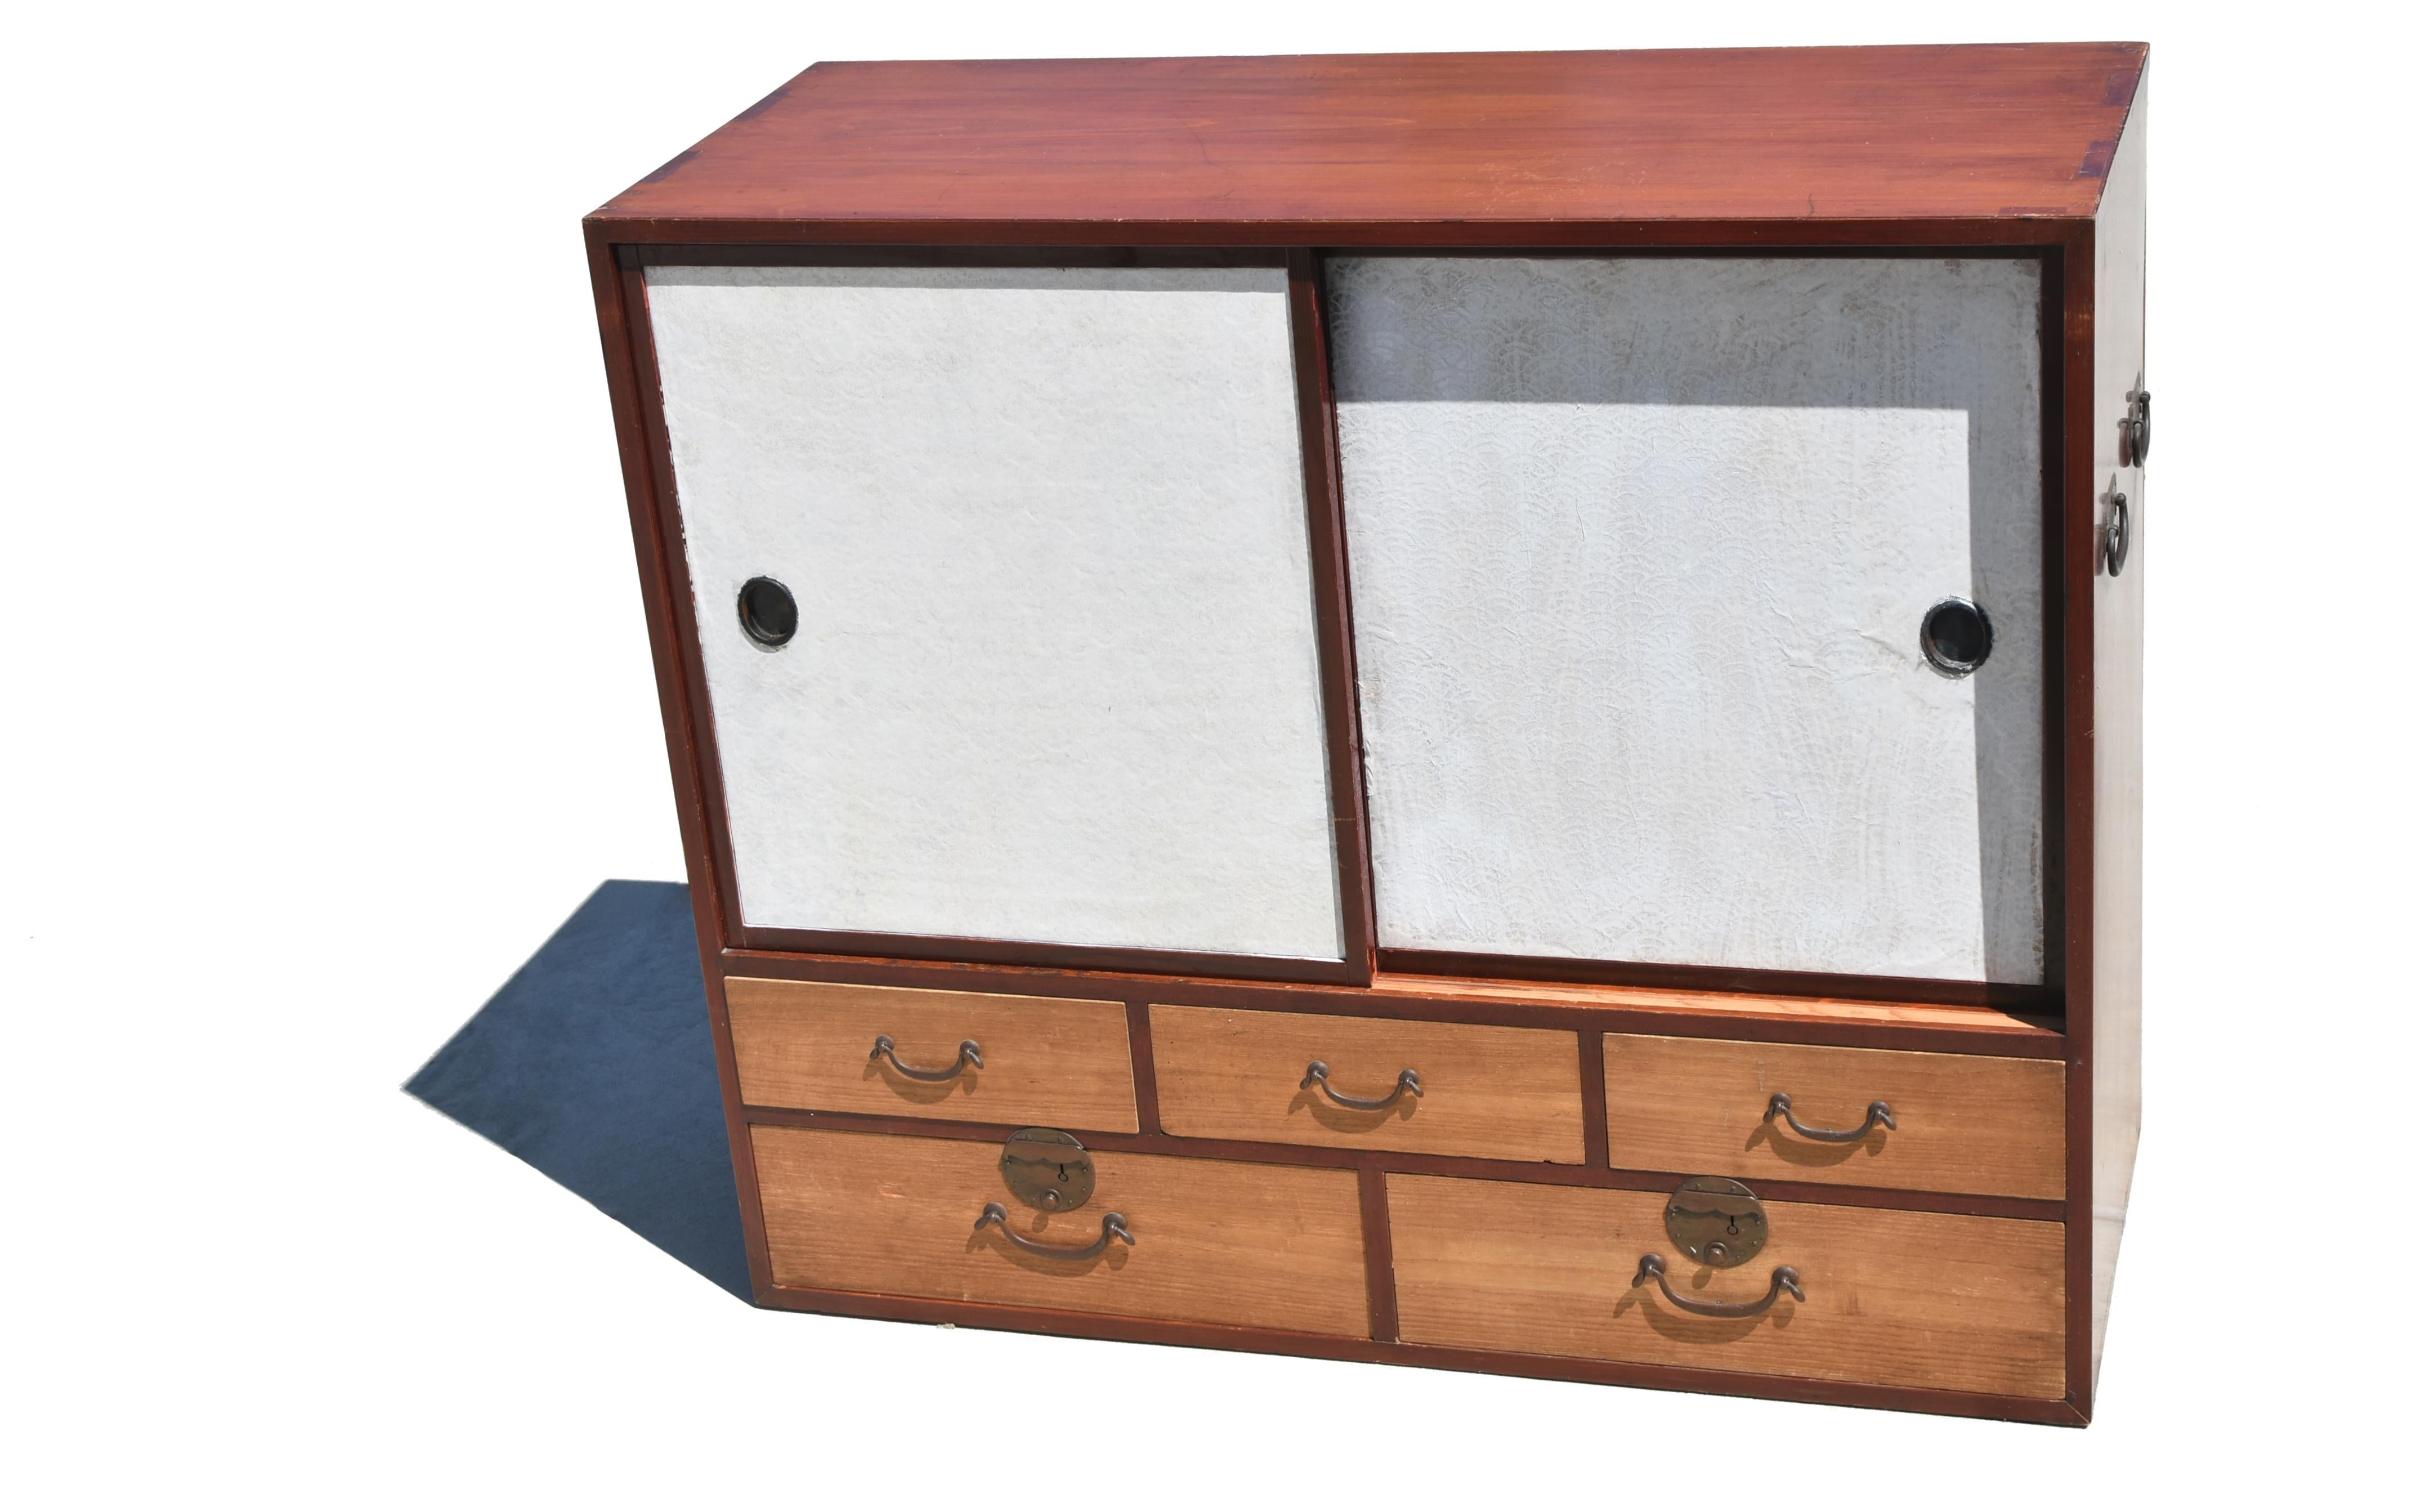 A most charming Tansu. The sliding doors are covered in white Japanese hand made rice paper in traditional shell pattern and fitted with oval bronze hardware. Behind the doors a large chamber equipped with a removable interior shelf supported by